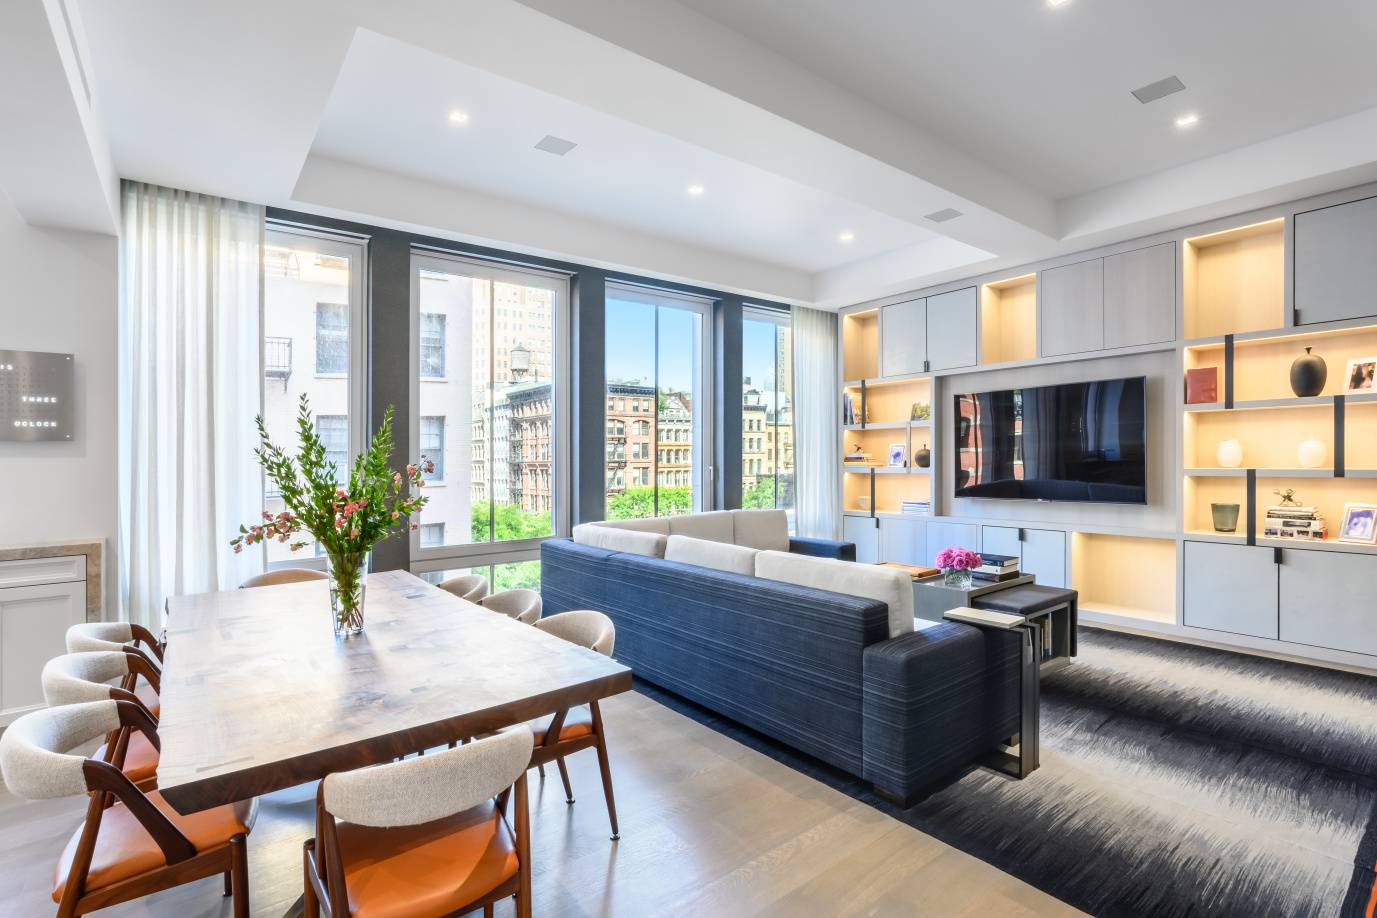 Spectacular, 100 foot wide, brand new, 5 bedroom, 5, 000 square feet, full floor apartment with custom interior design from Pembrook amp ; Ives provides perfect turnkey opportunity.